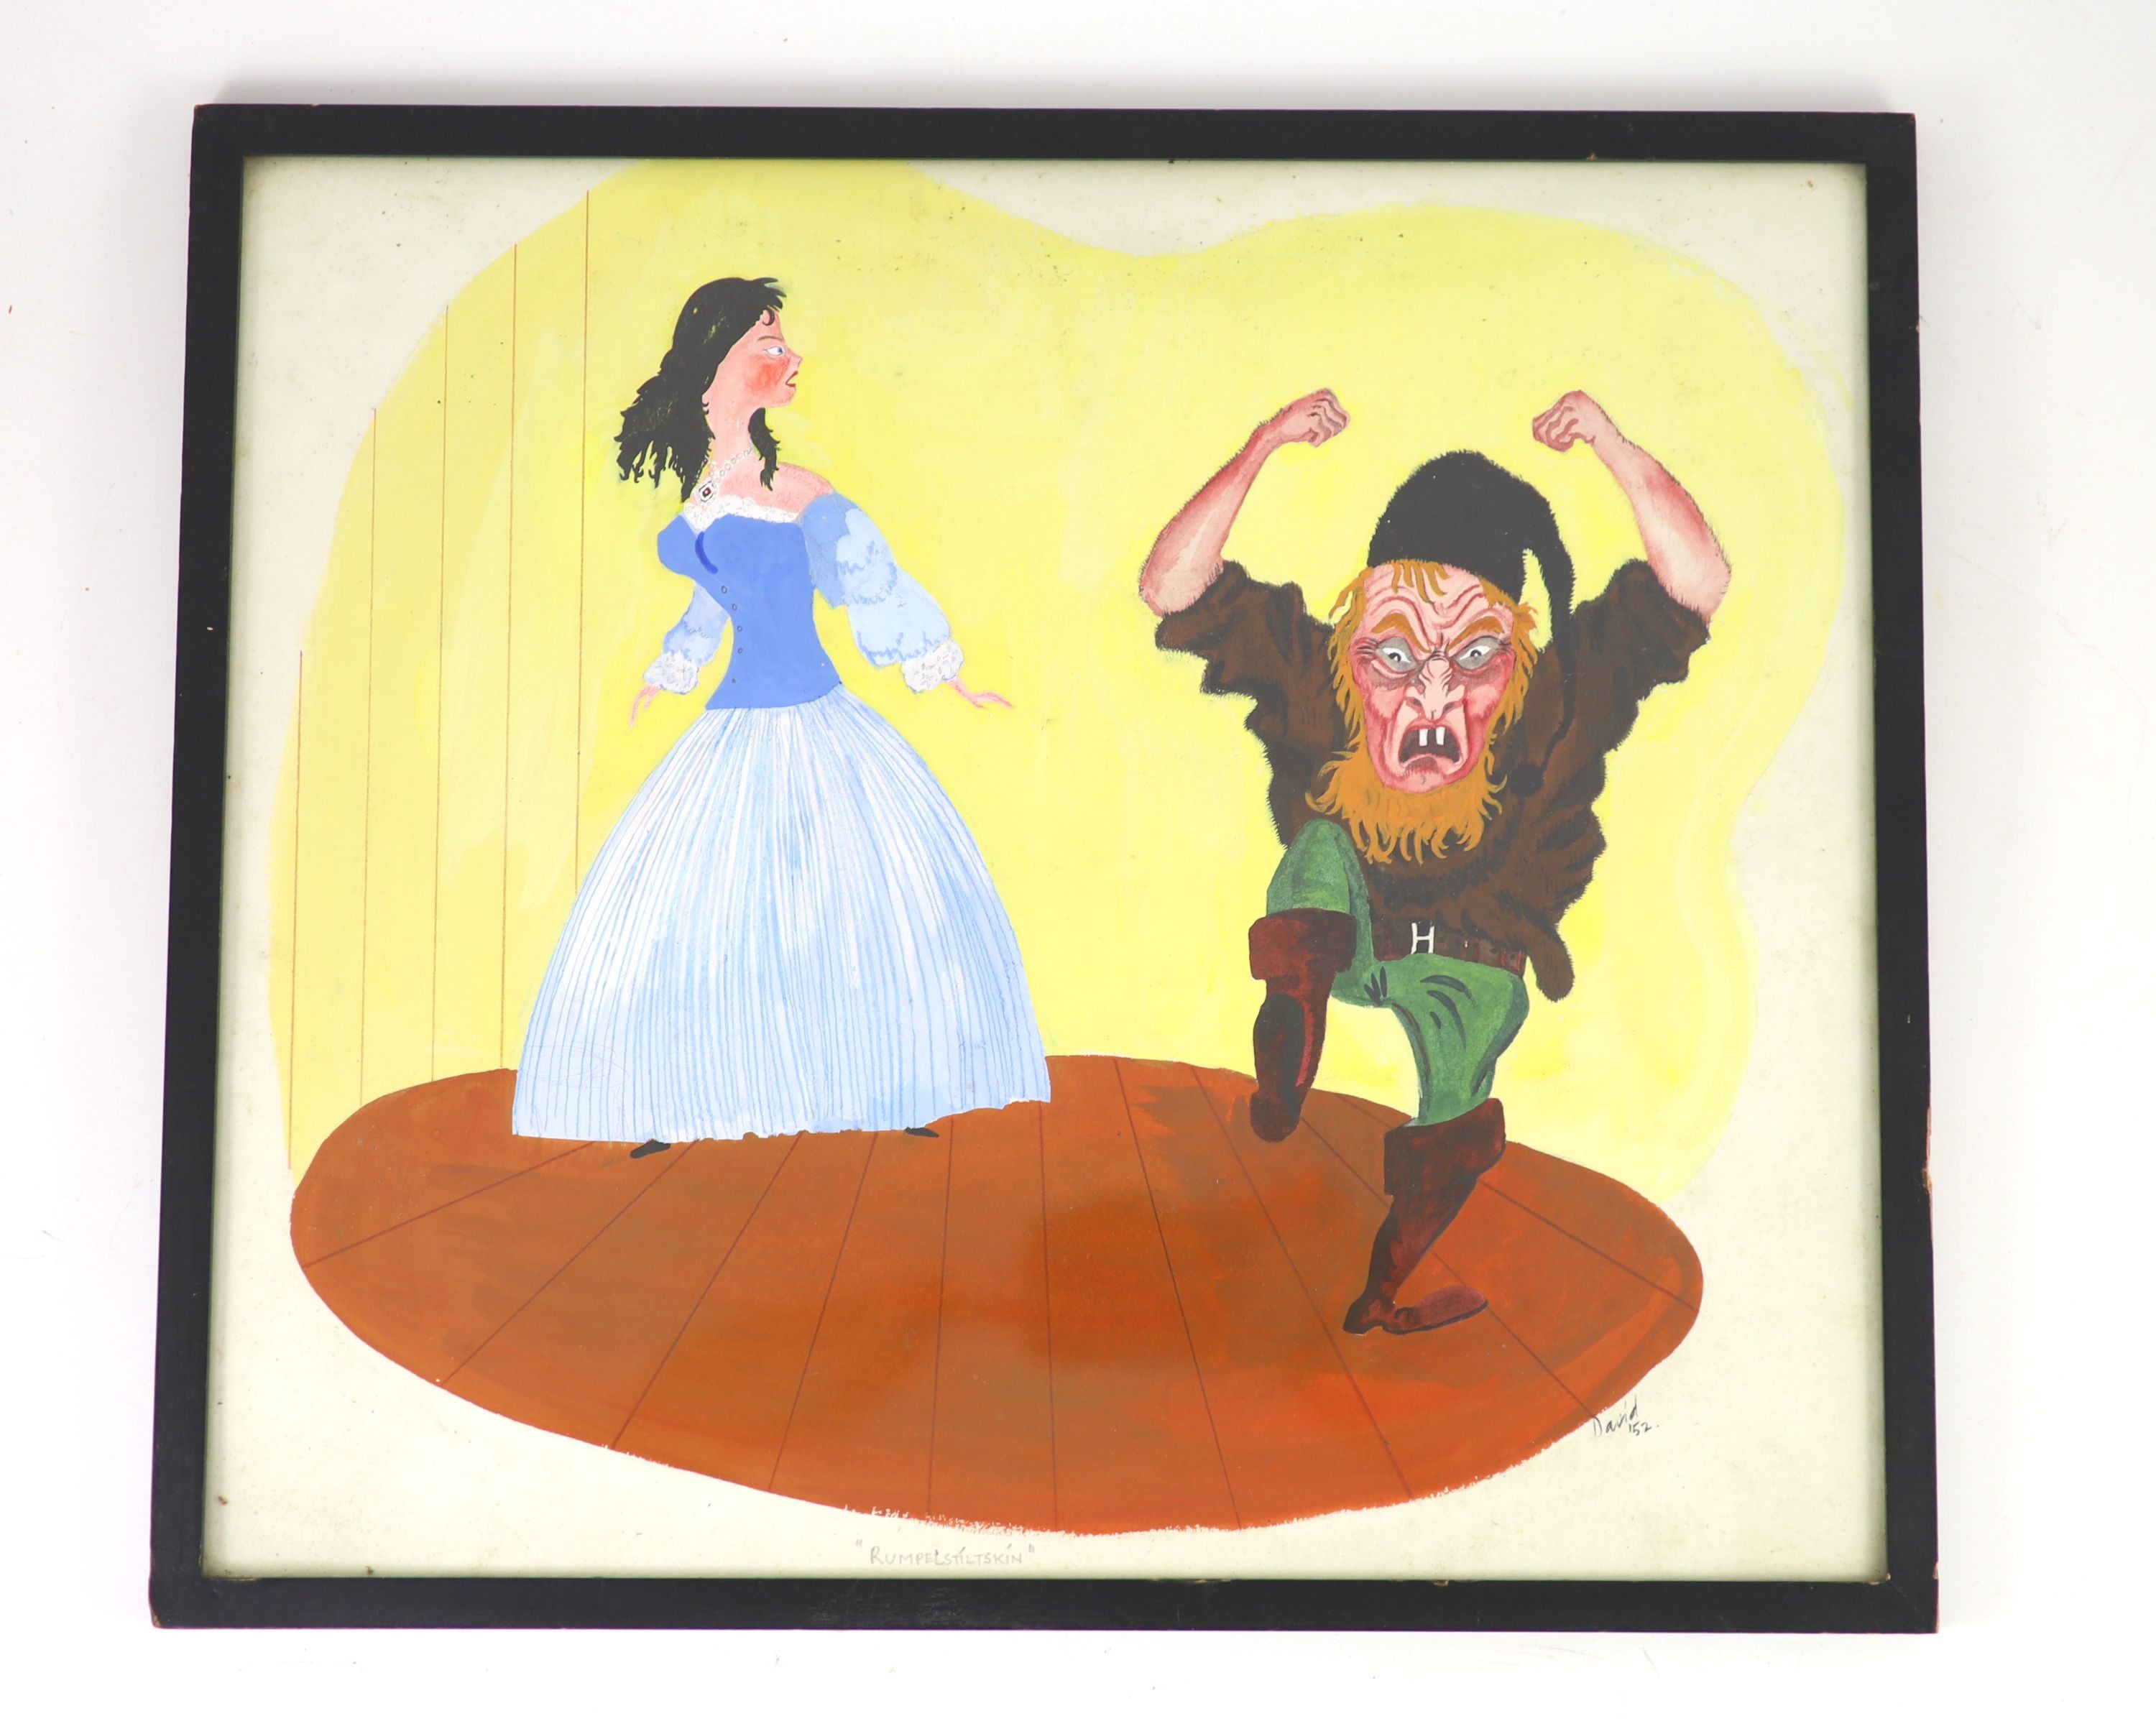 David John Moore Cornwell (pen name John Le Carre), (1931-2020) - ‘’Rumpelstiltskin’’, watercolour, signed, dated, ‘52, inscription verso, - ‘’Painted by David Cornwell (better known as John Le Carre) given to Anne Simps